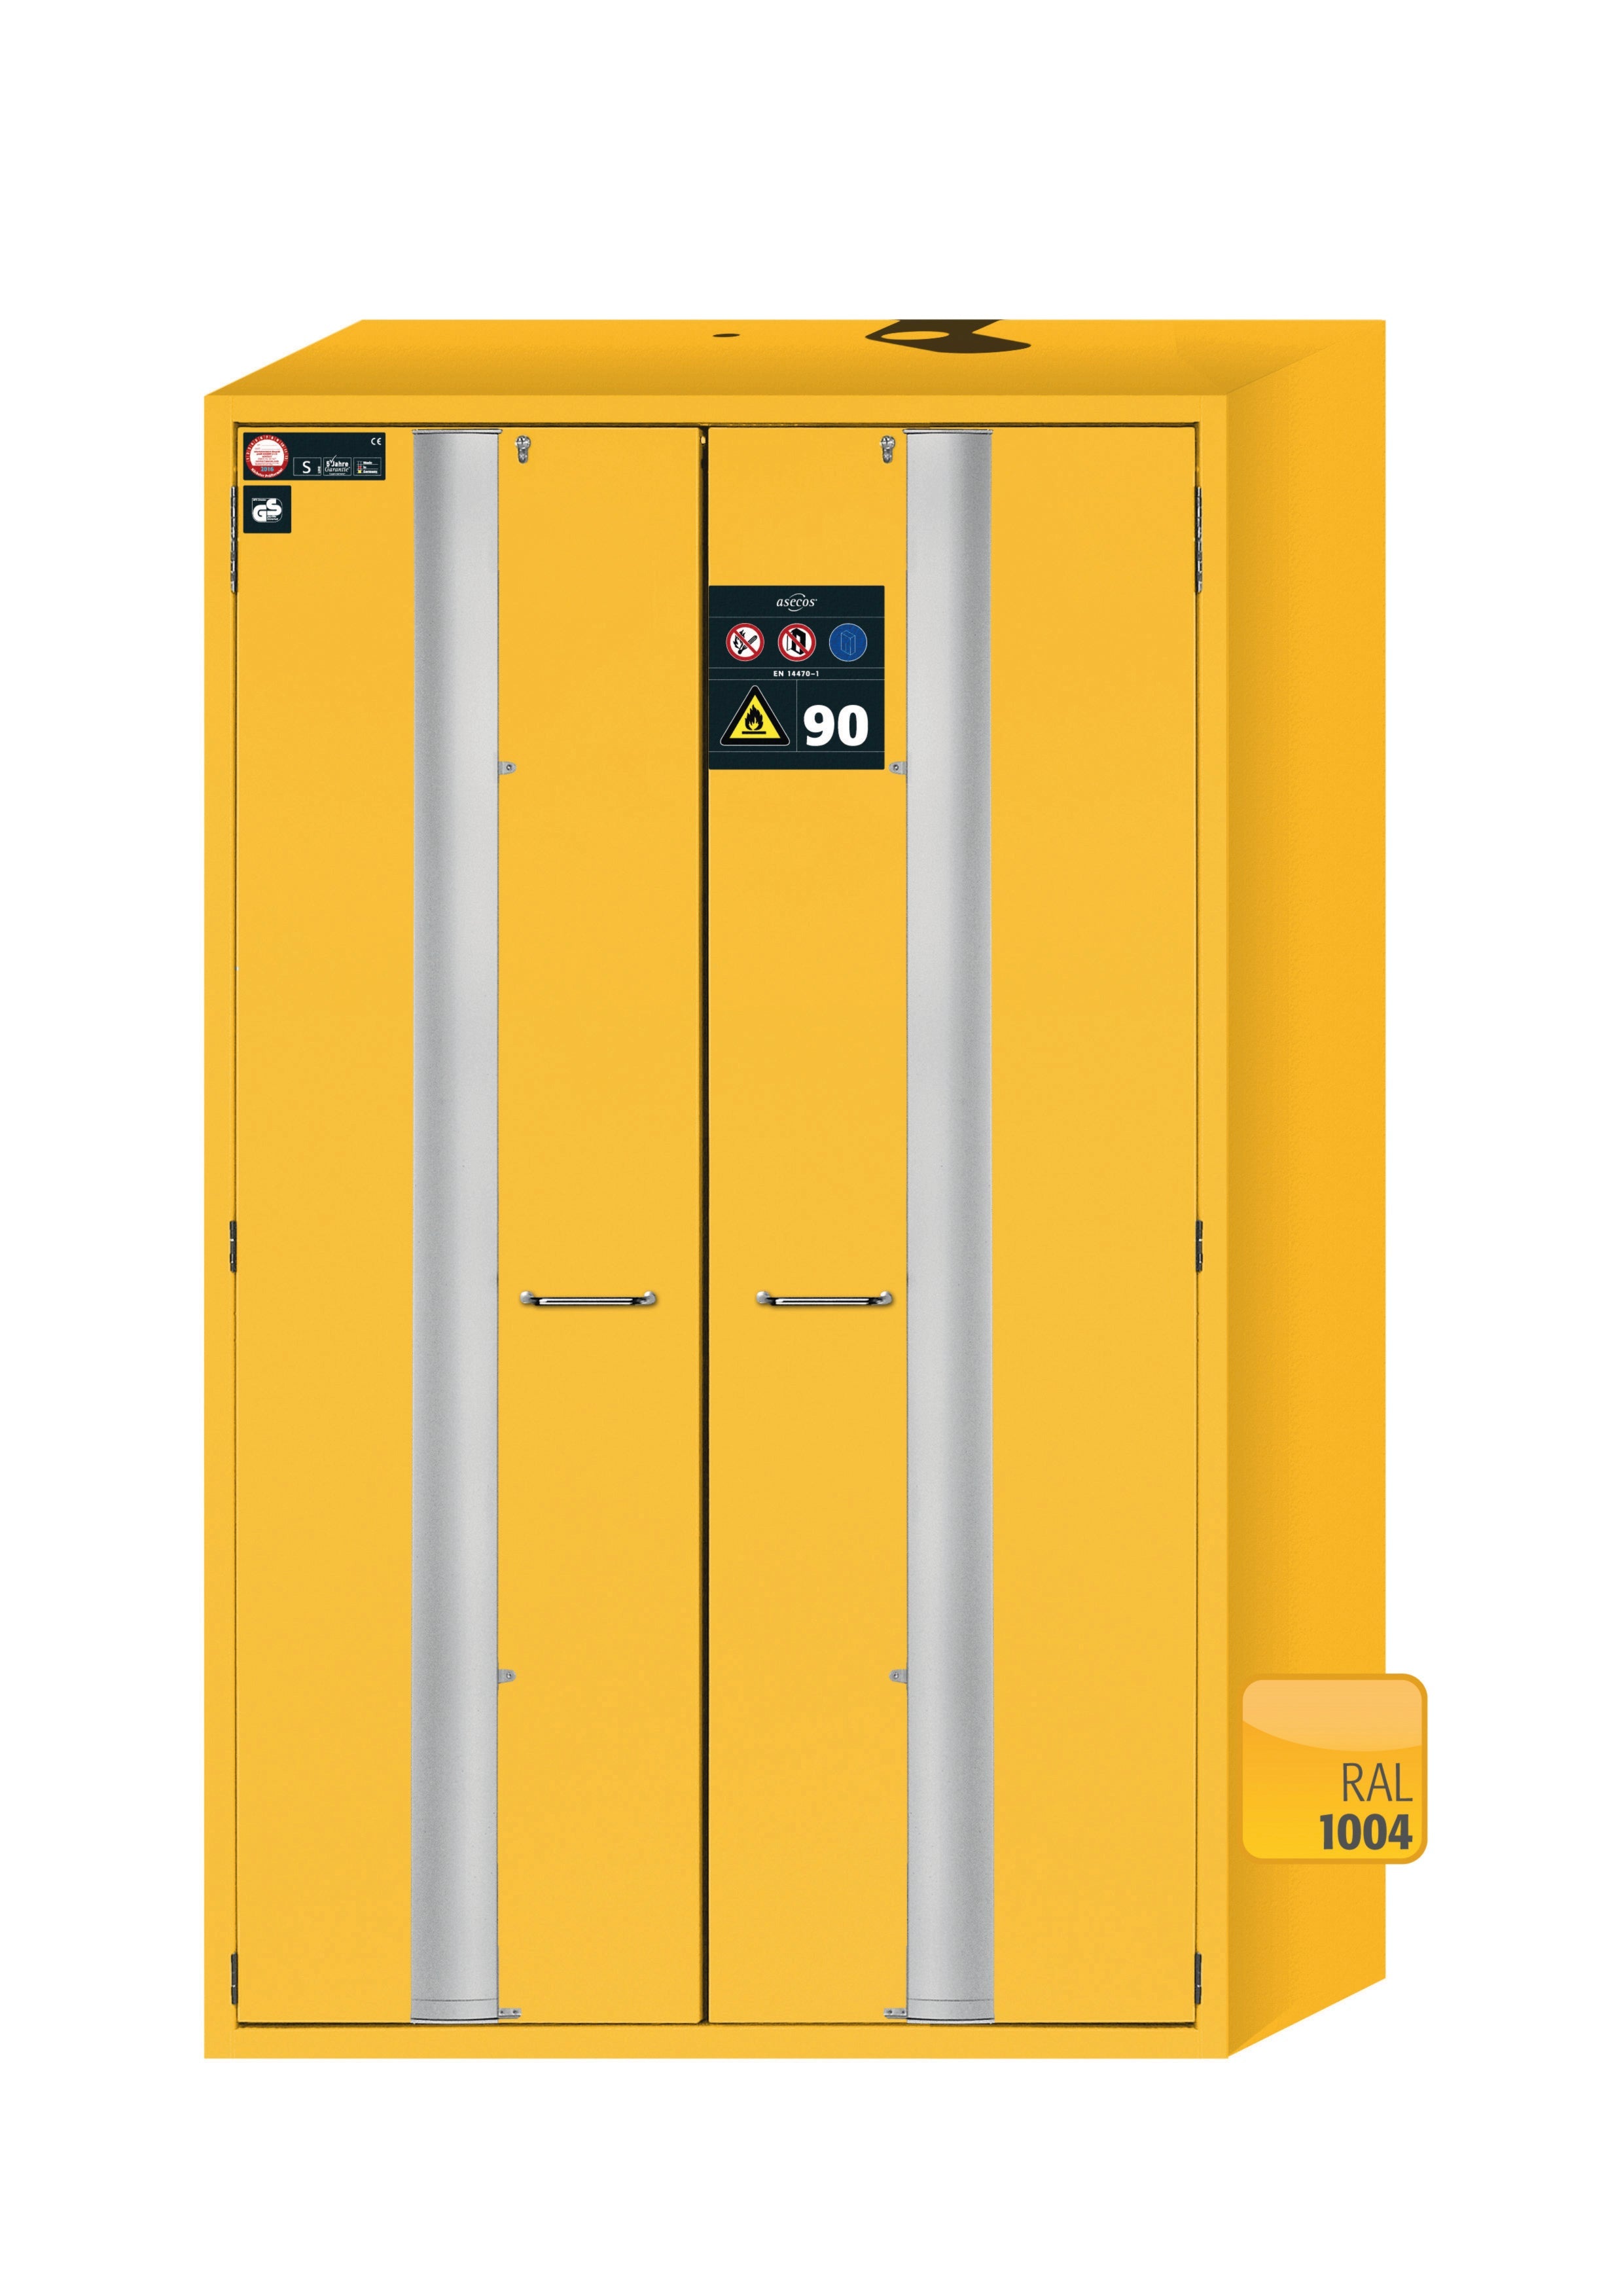 Type 90 safety storage cabinet S-PHOENIX-90 model S90.196.120.FDAS in warning yellow RAL 1004 with 6x drawer (standard) (stainless steel 1.4301),